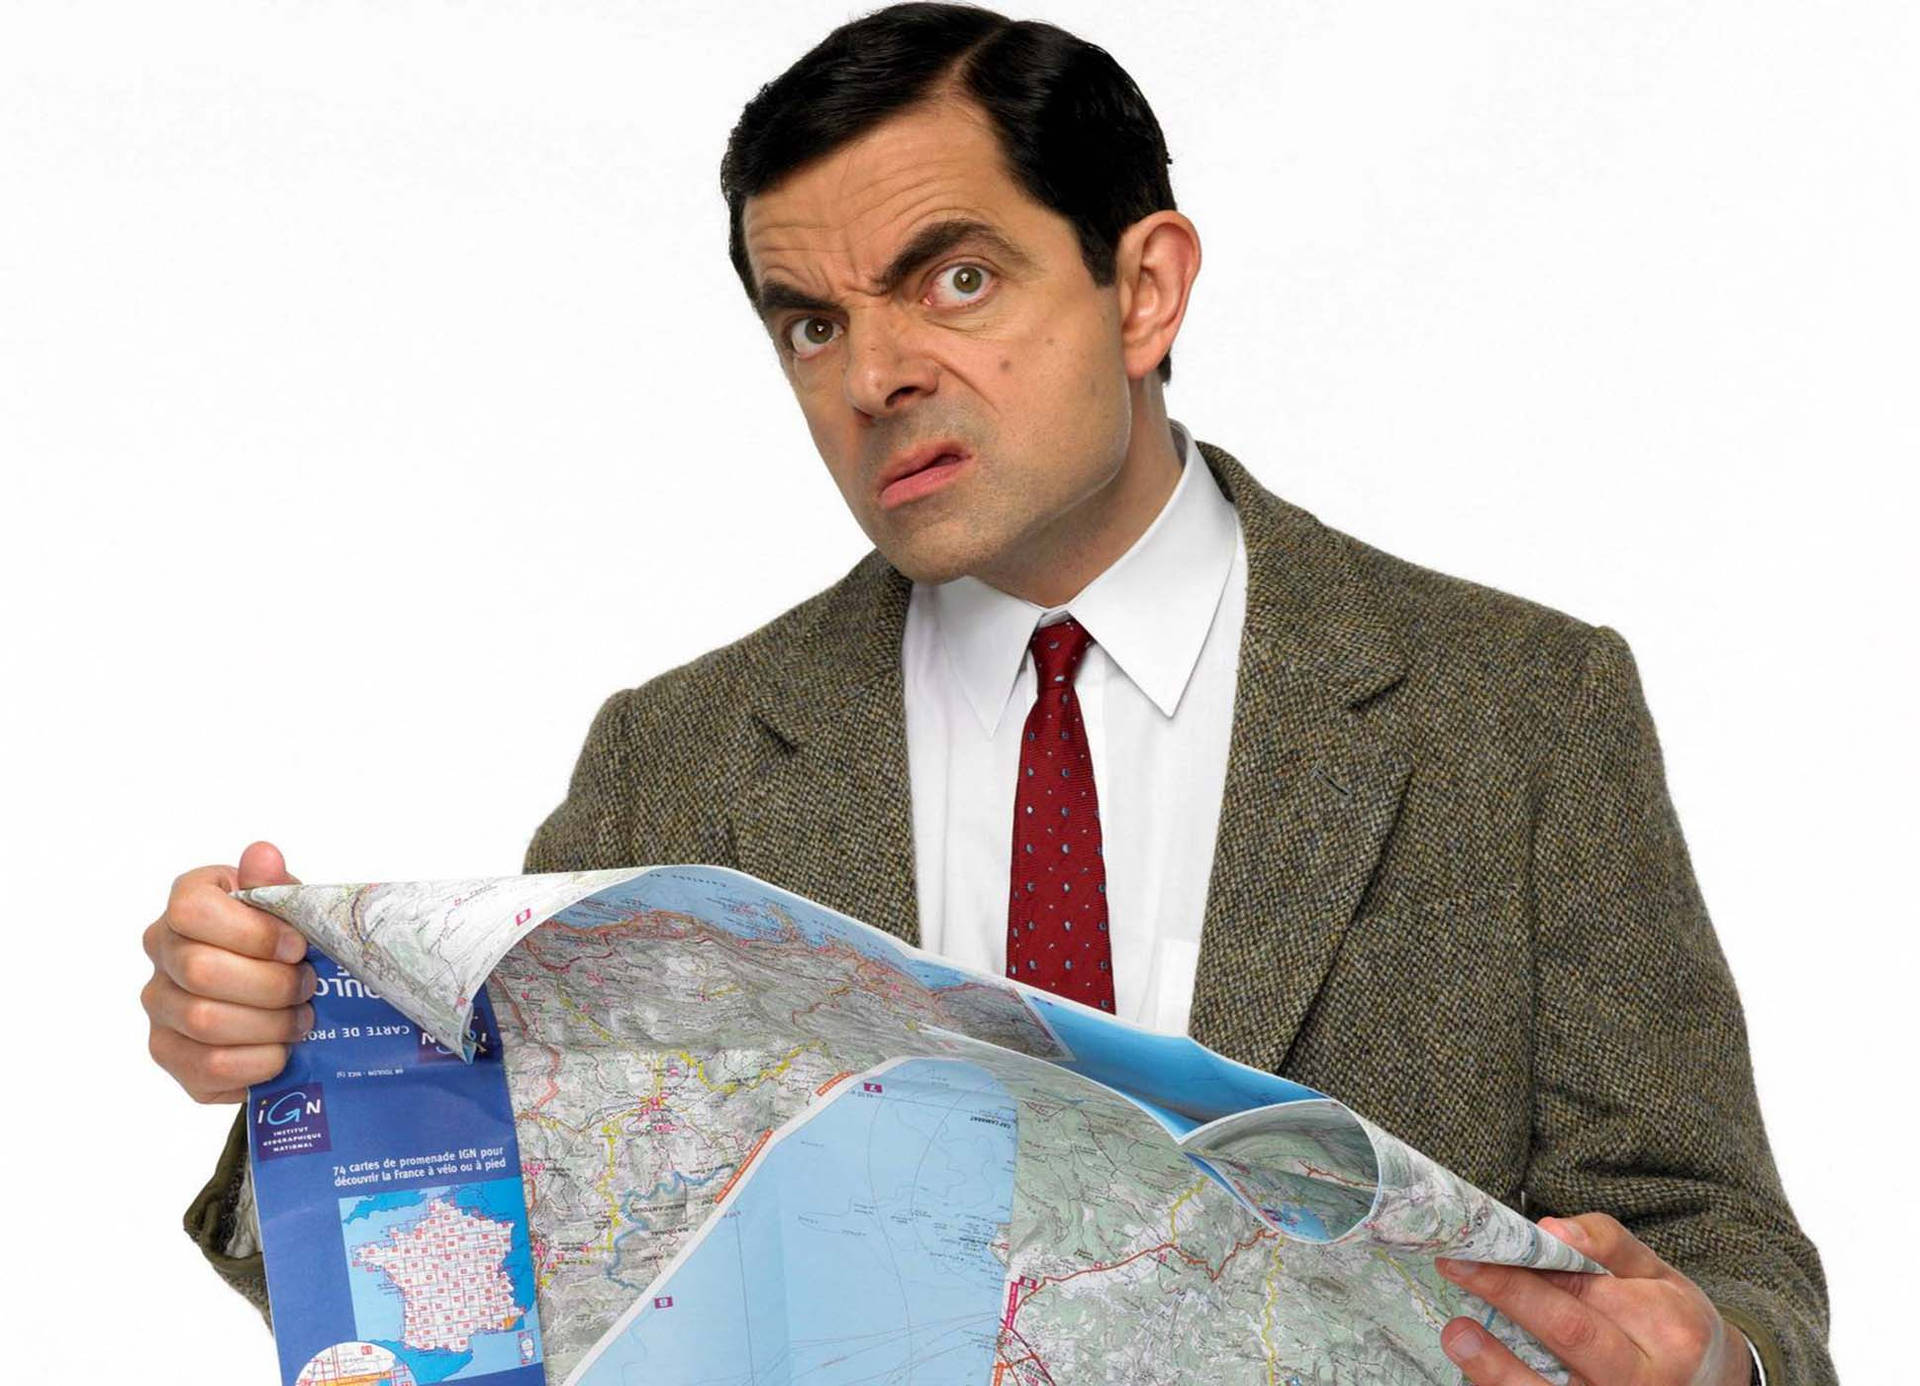 Mr. Bean Holiday Map Background